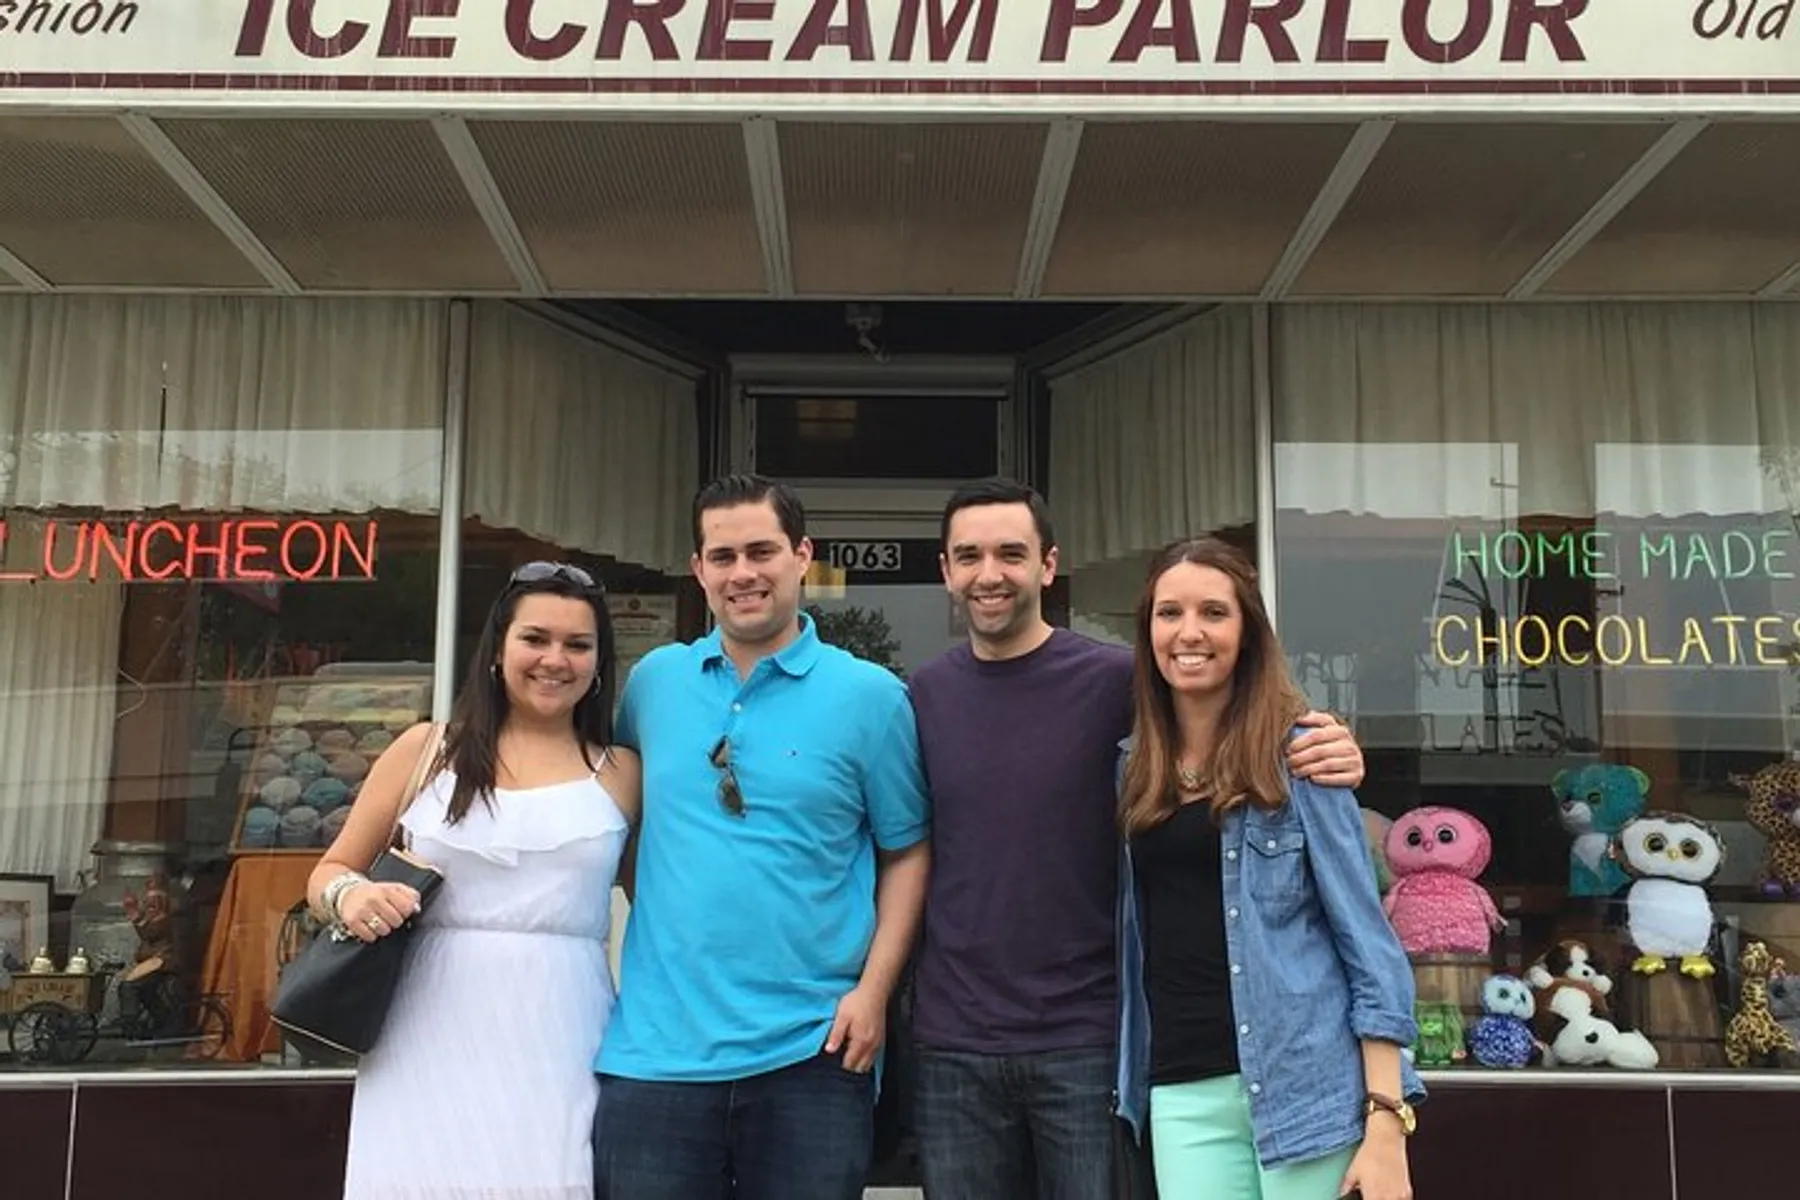 Four people are smiling in front of an old-fashioned ice cream parlor that also advertises homemade chocolates and luncheon services.